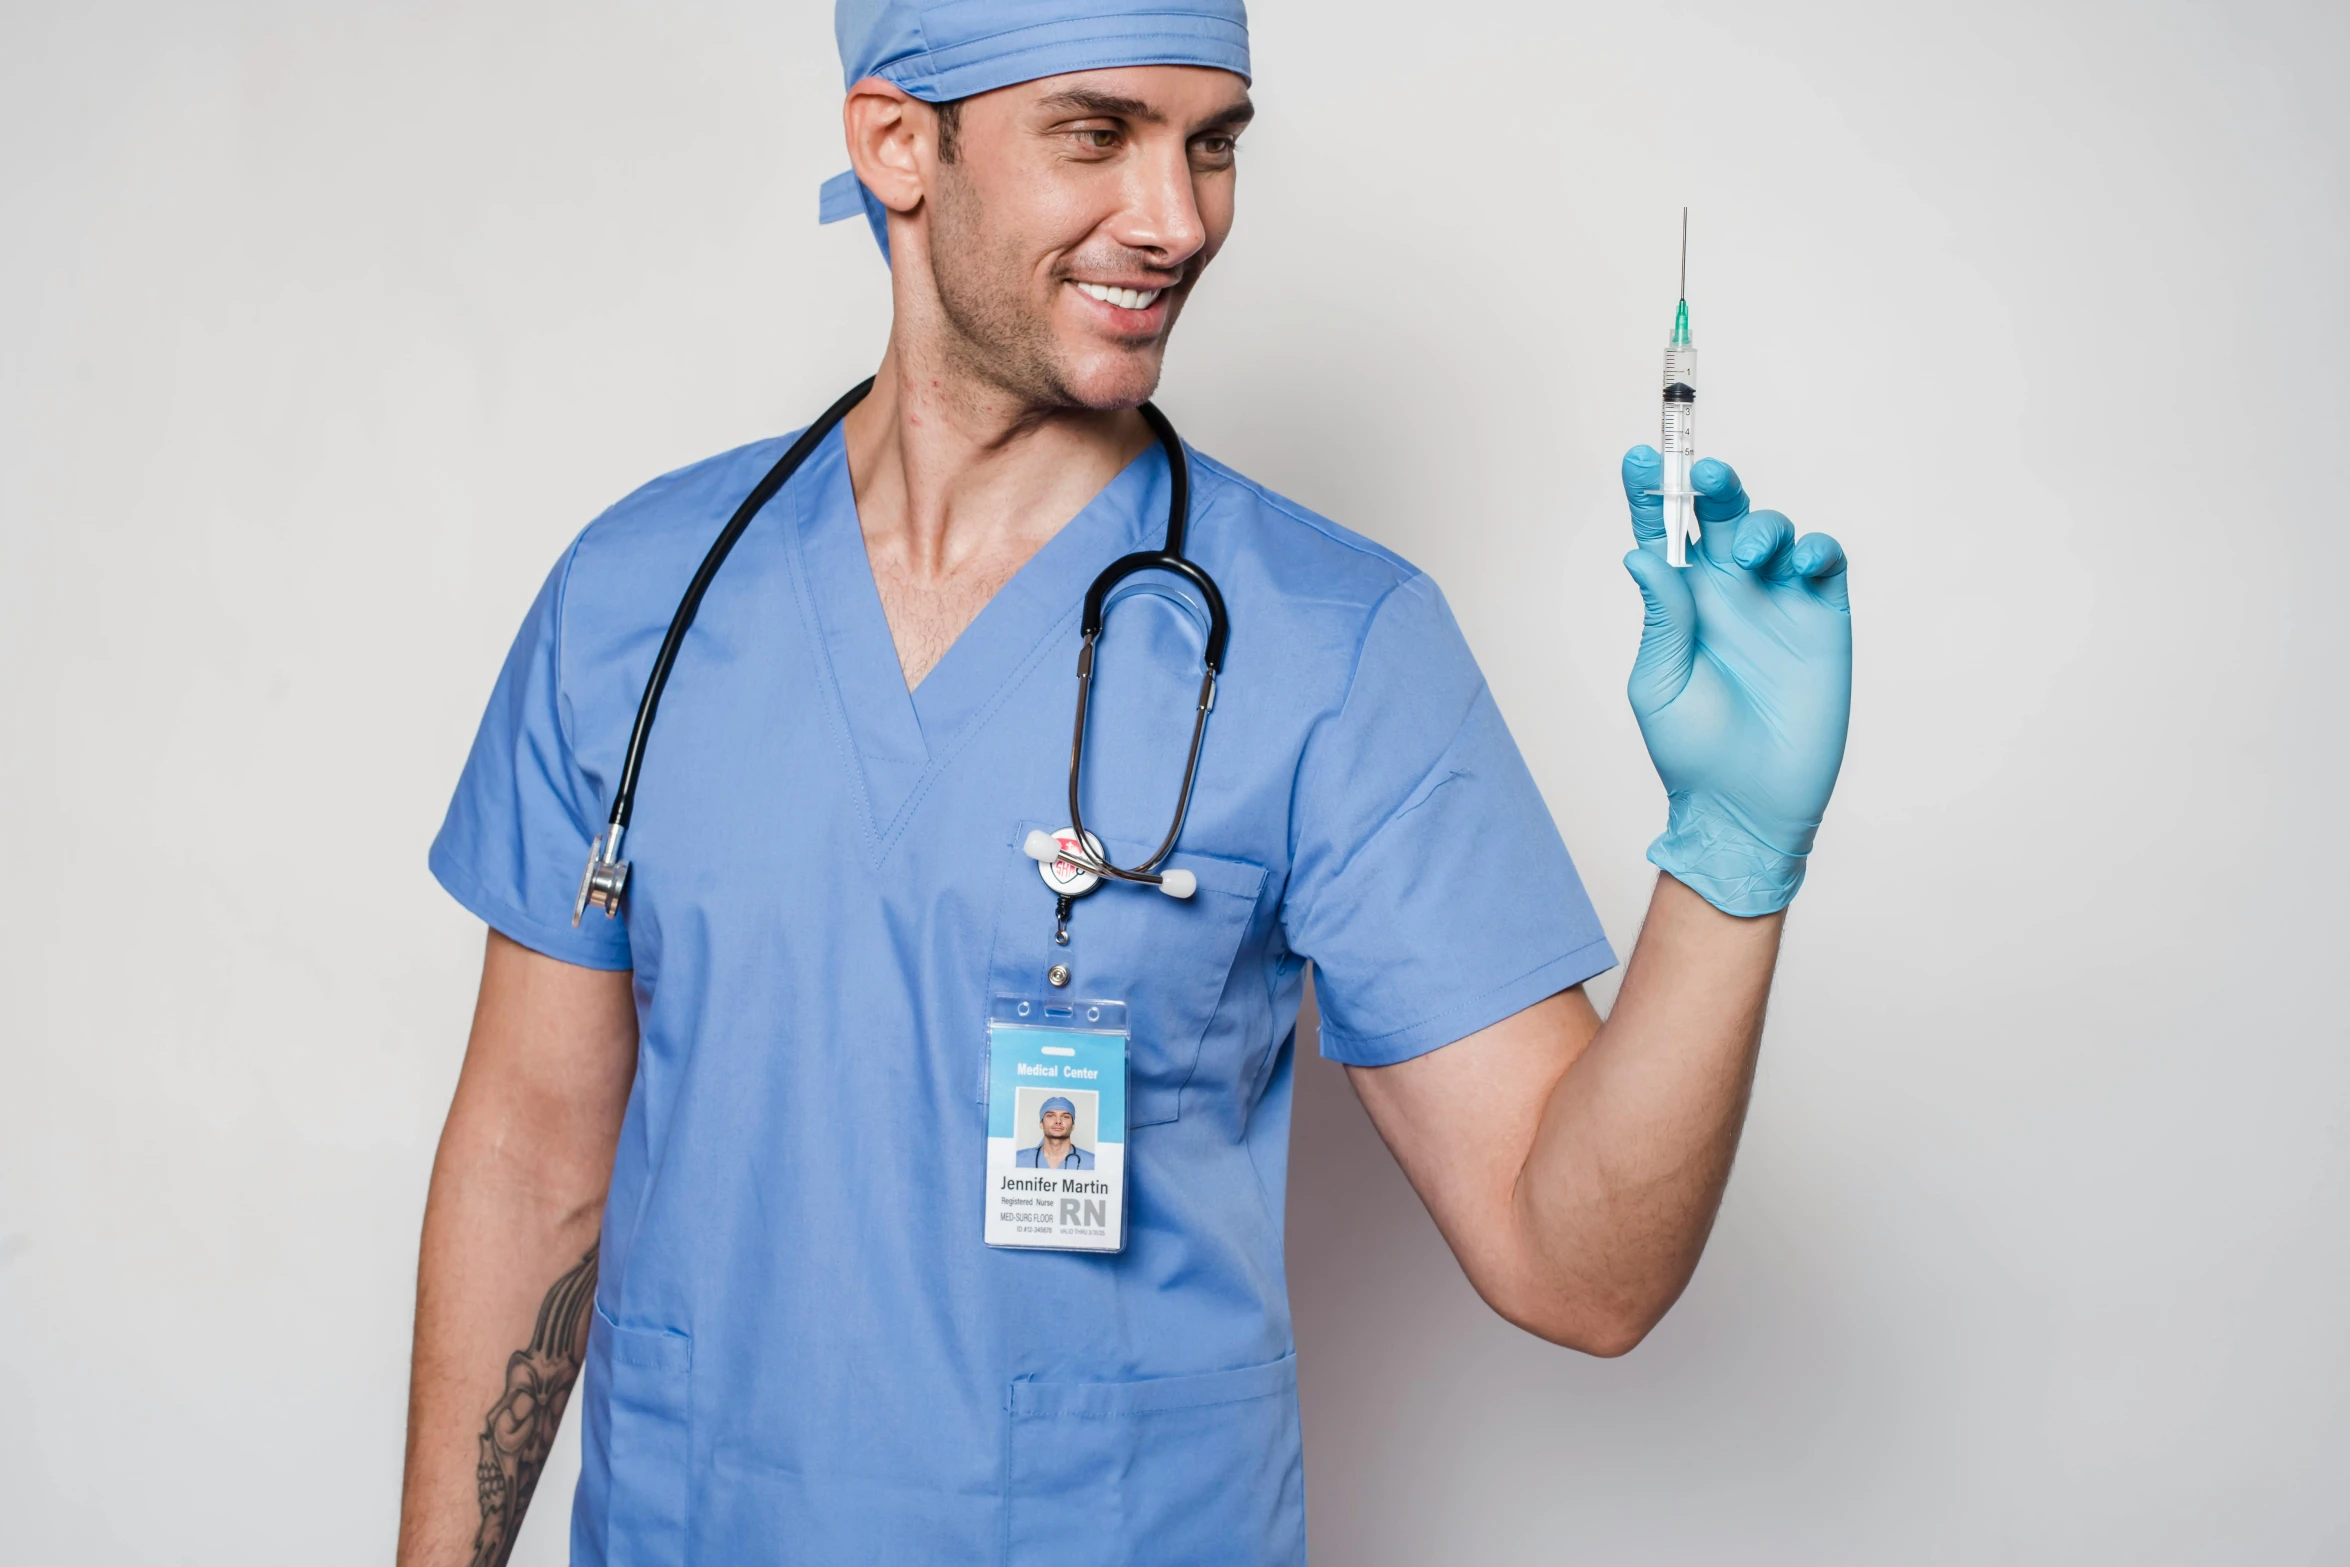 a man in a blue scrub suit holding a syssor, by Kristian Zahrtmann, pexels contest winner, renaissance, syringe, steroid use, nurse costume, professional profile picture